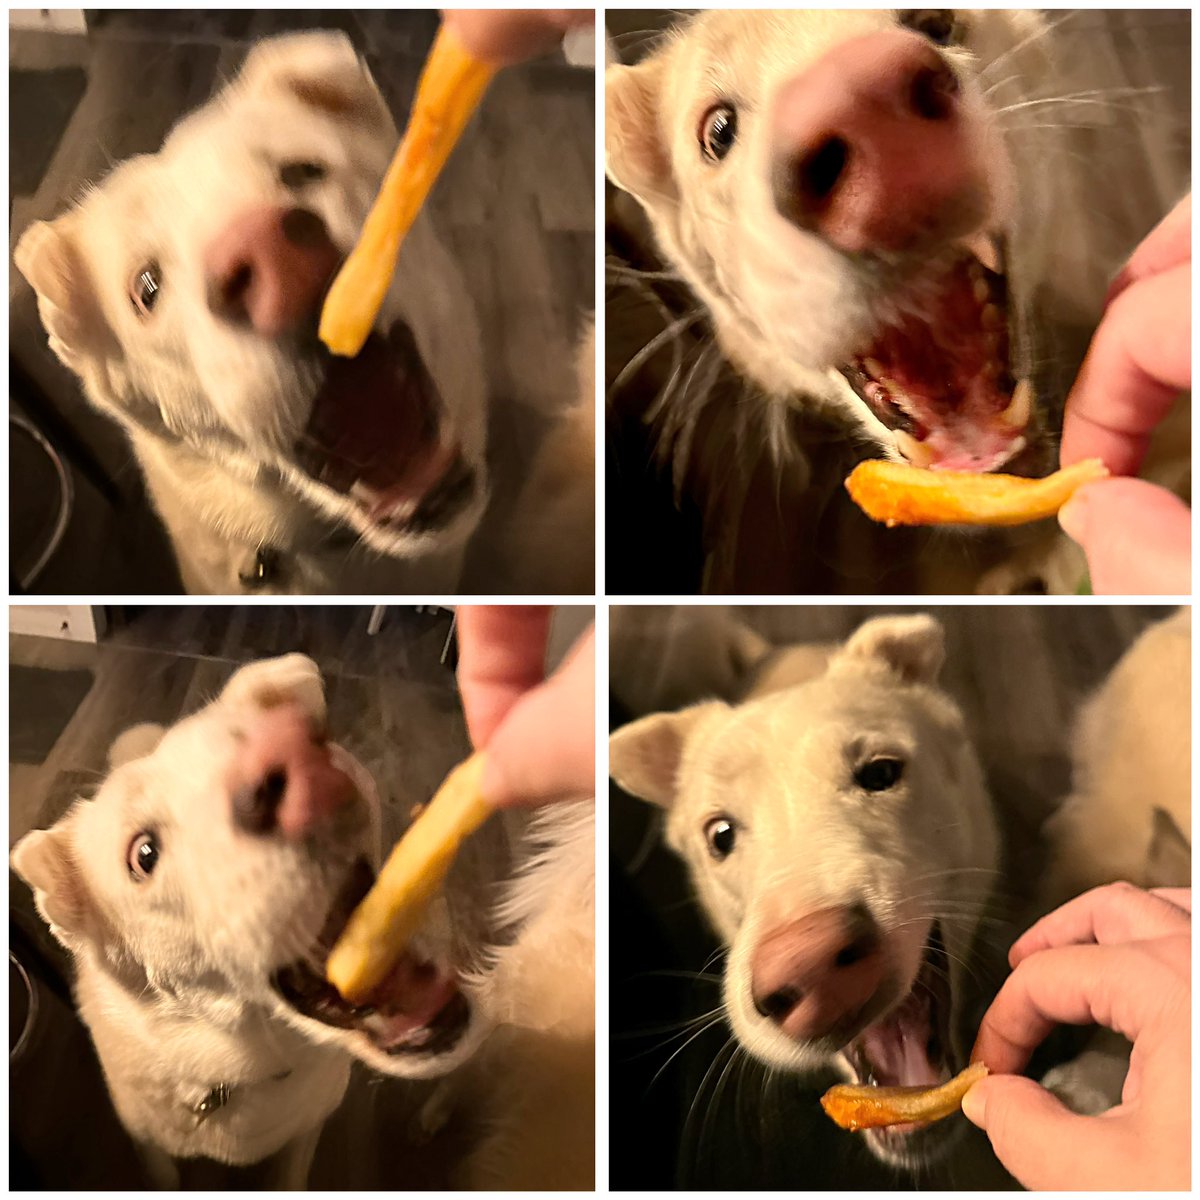 Mom n dad didn’t get steaks last night buuuut they brought home frenchy fries! Mom couldn’t get good photos but she thinks the blurriness conveys the speed at which I snatched dem! (Gently, of course) 🤣🍟 #yum #funnyface #dogsofX #Sunday